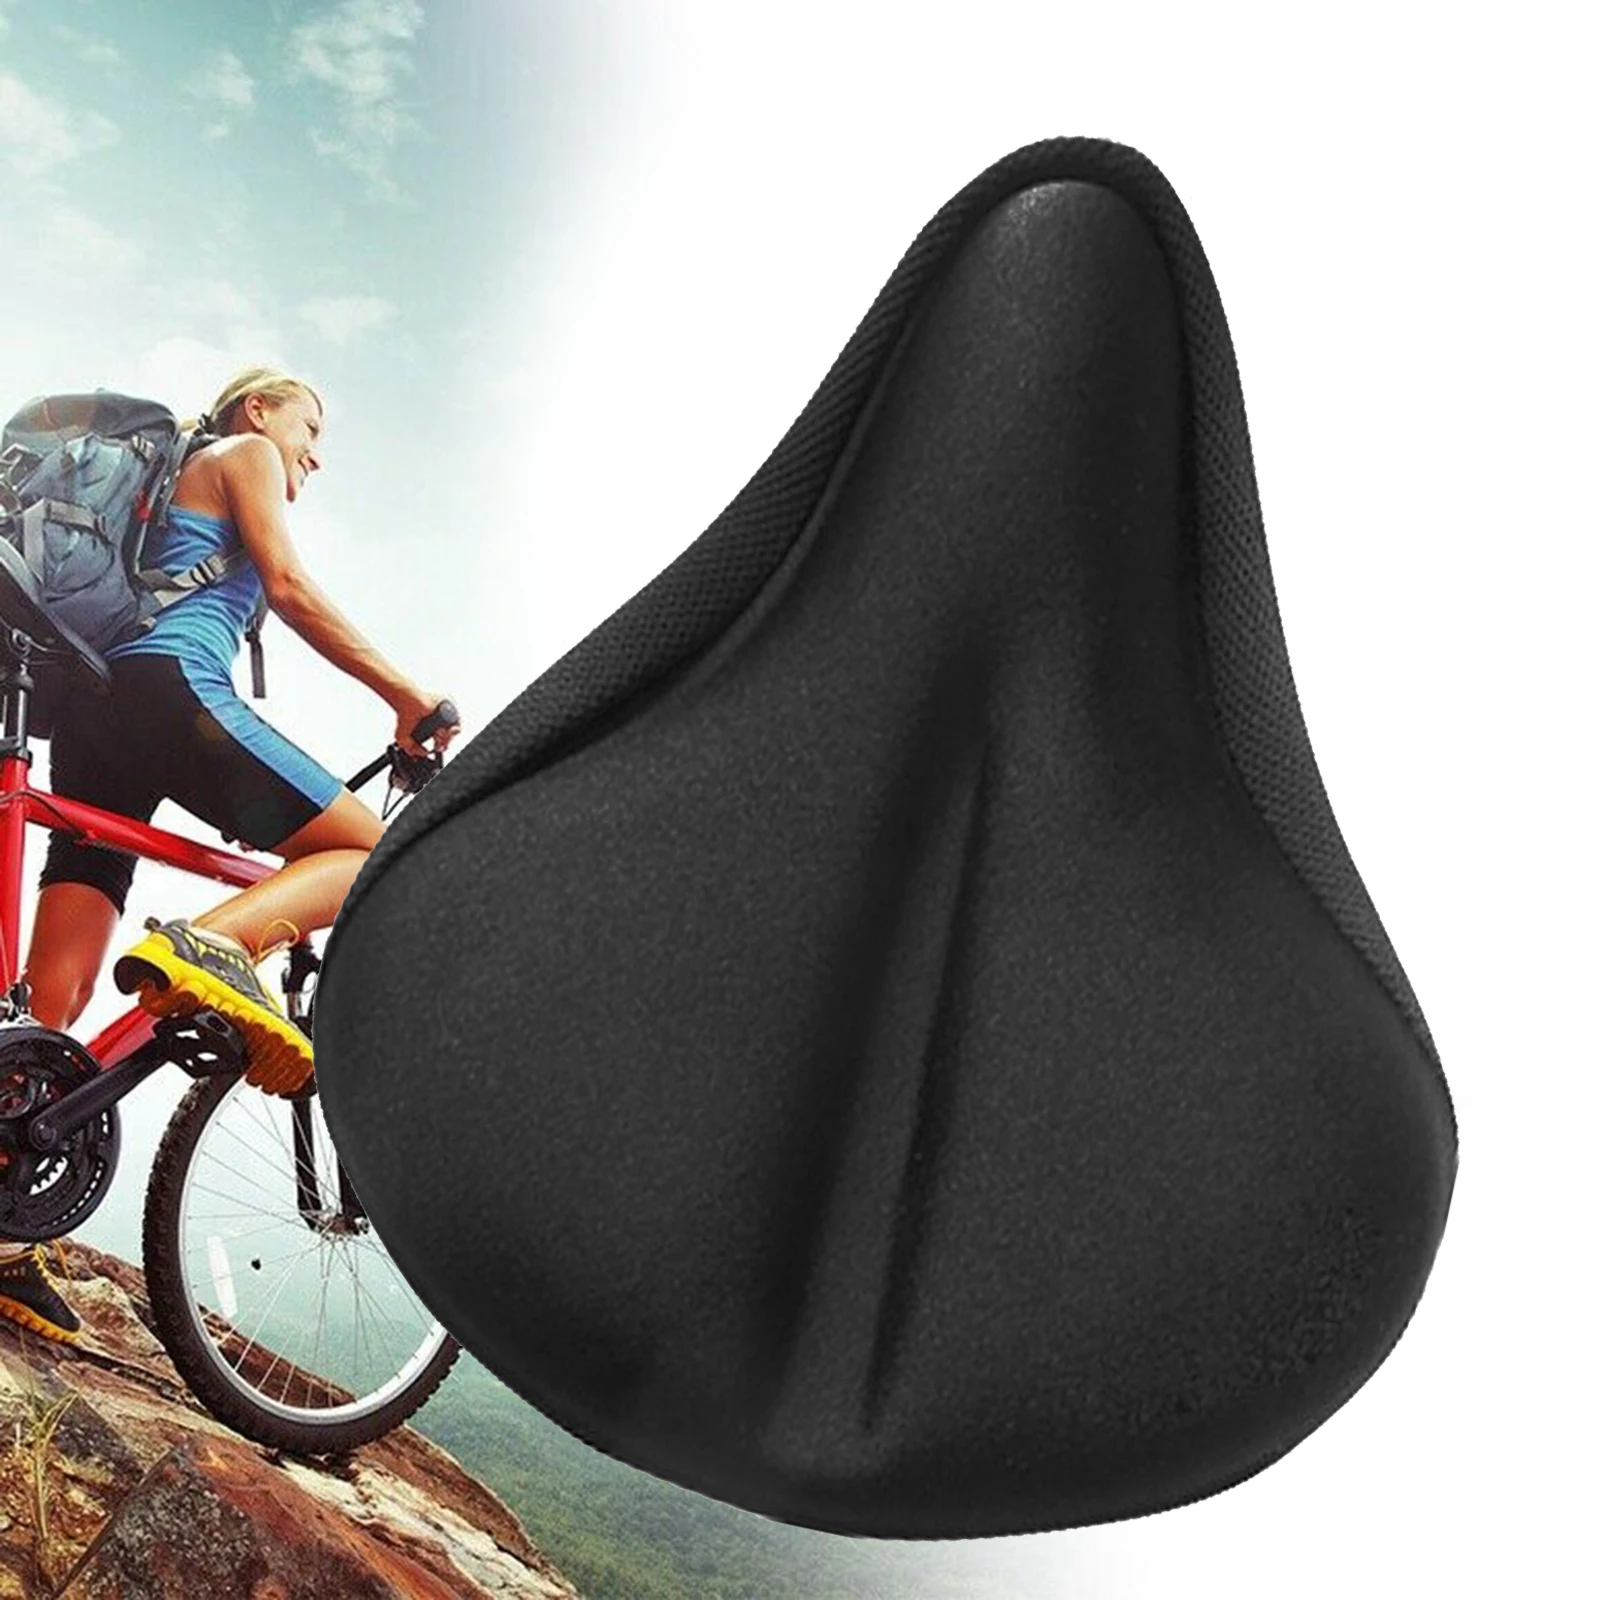 Bike Seat Cushion Cover, Padded Gel Bike Seat Covers Bicycle Saddle Pad for